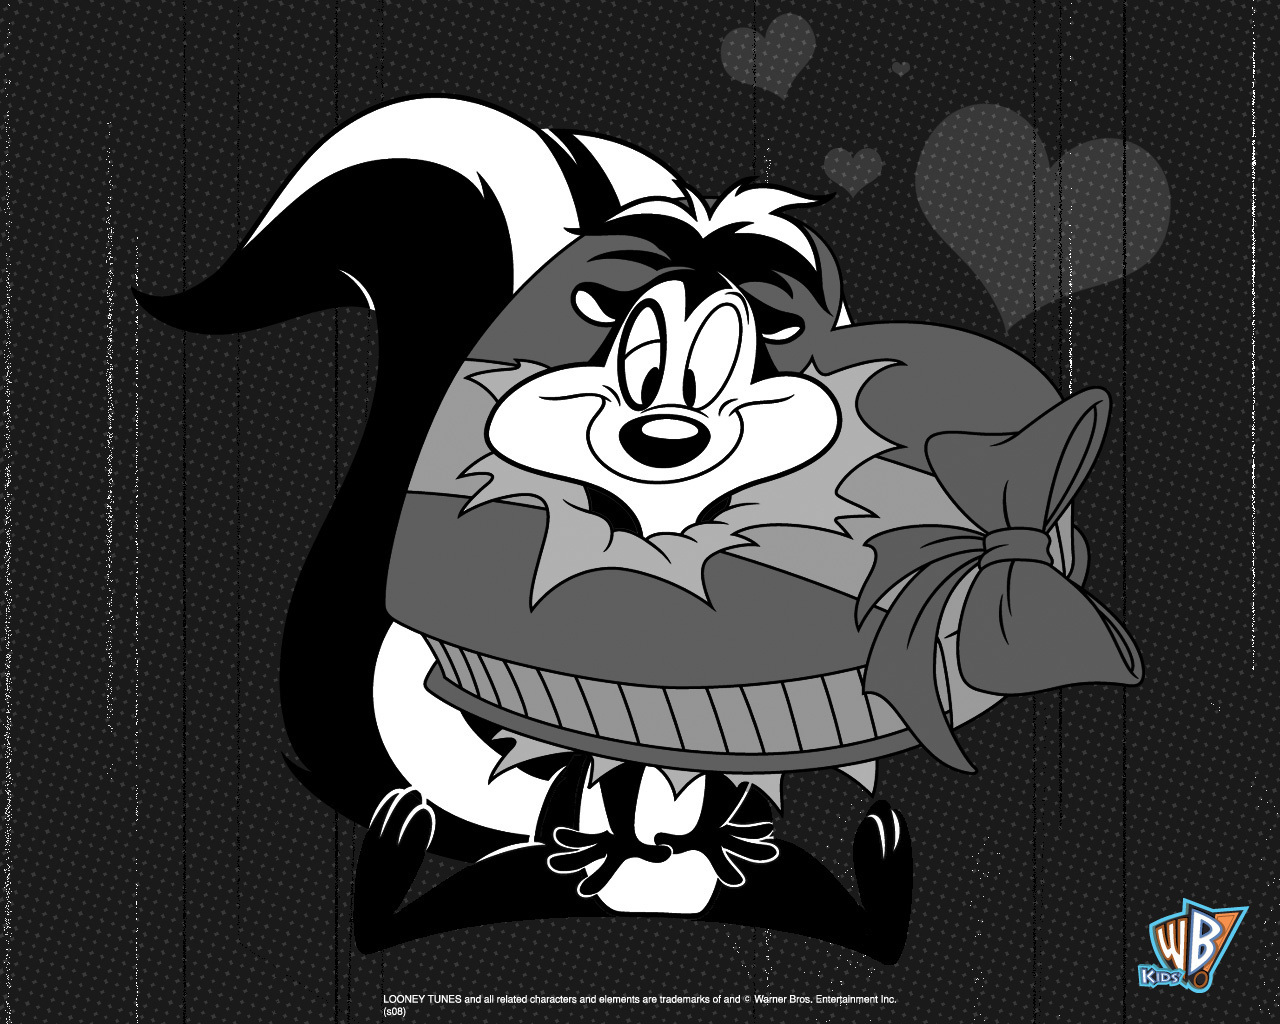 Skunks Image Pepe HD Wallpaper And Background Photos